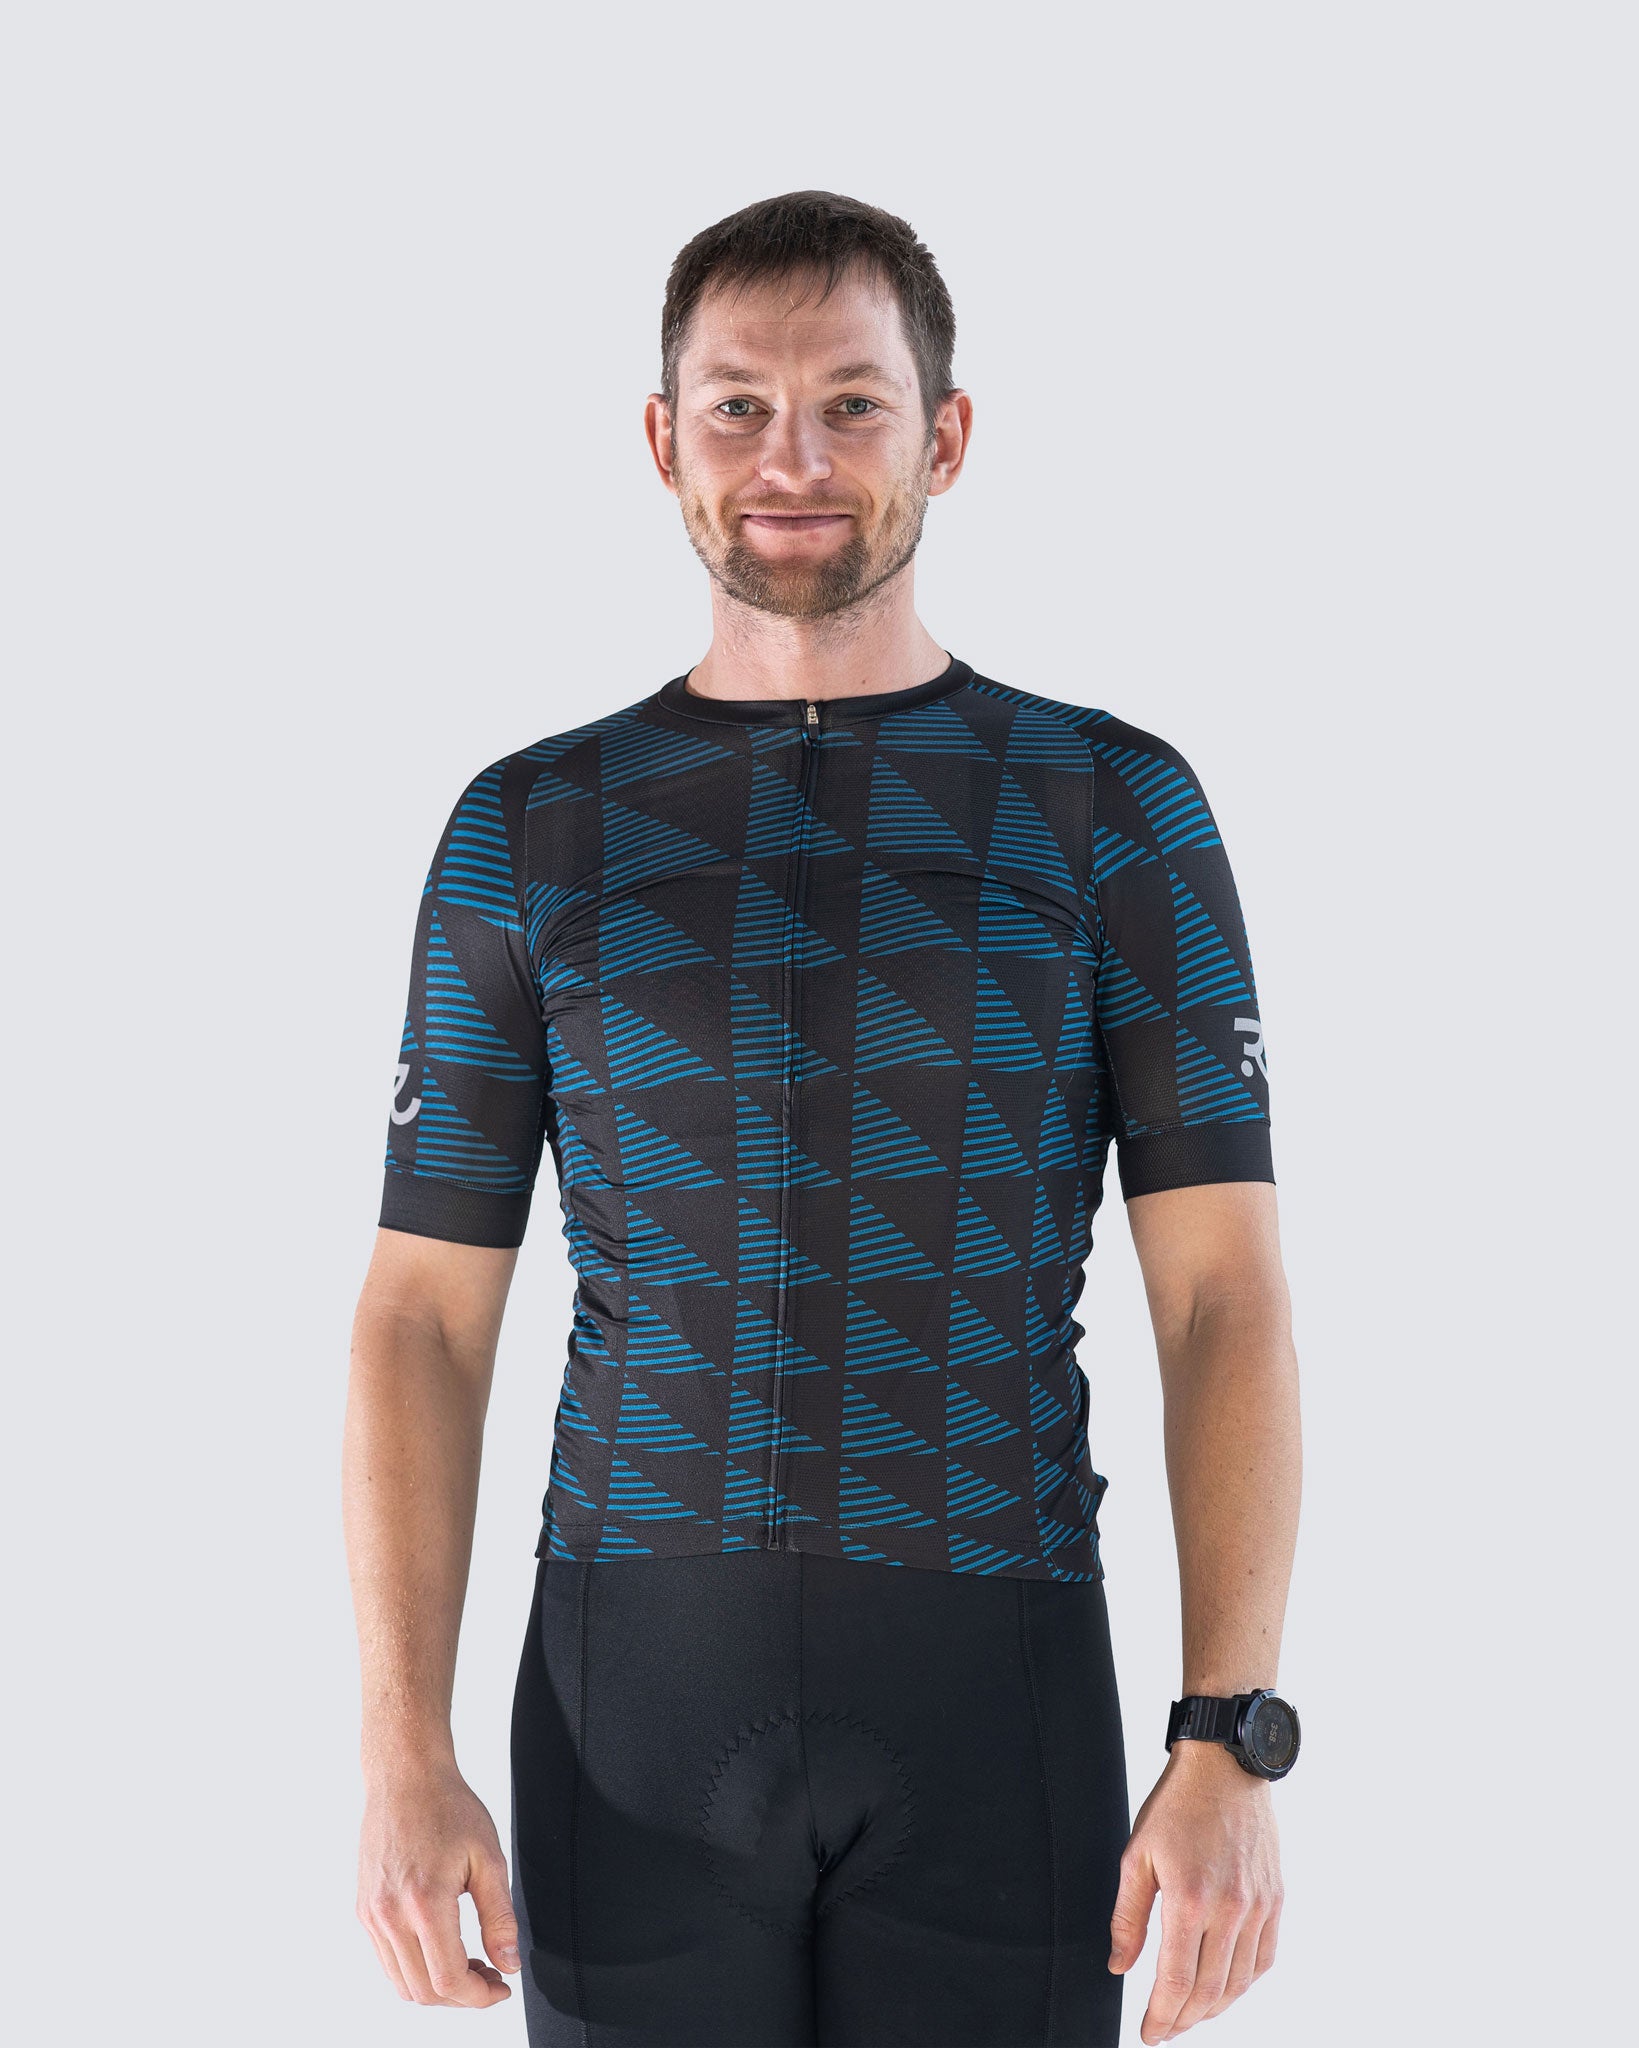 front view of blue jersey with diamonds pattern